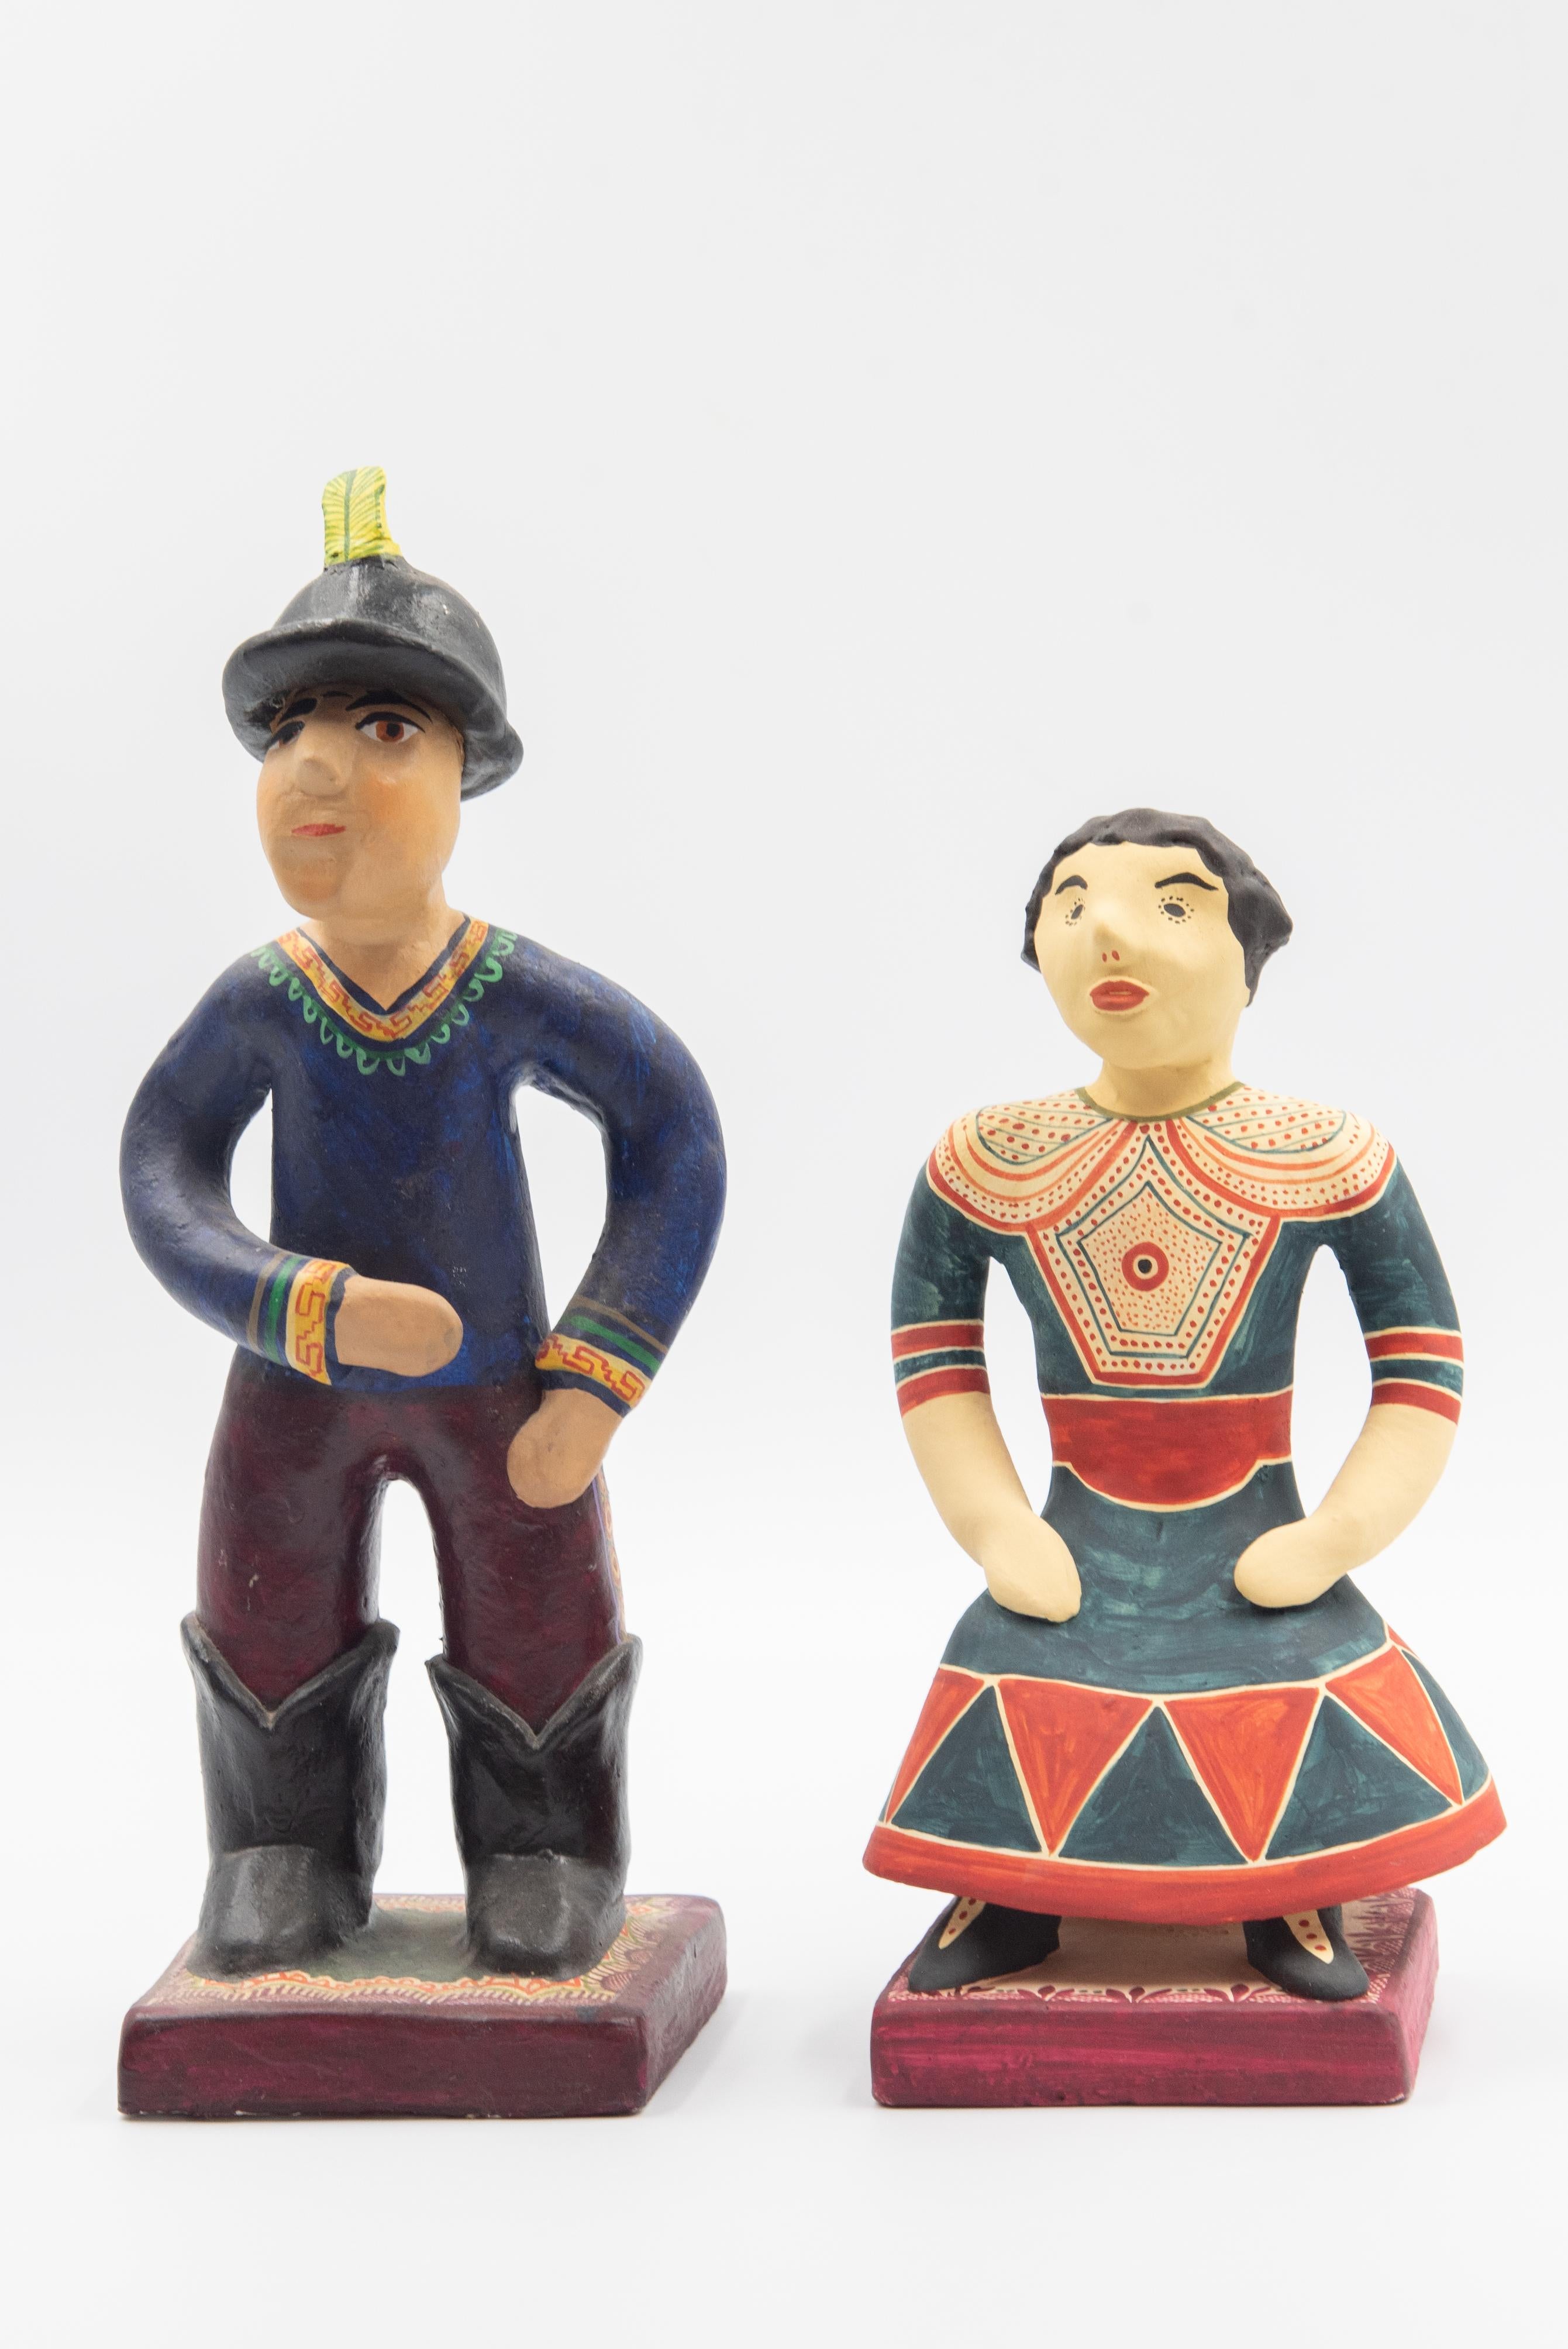 These colorful Folk Art statues are pieces inspired by the collection by Catalina Orta Uroza de Castillo in the 1950s-- displayed in the Museum of International Folk Art in New Mexico. Made in Izucar de Matamoros by her daughter in law, Soledad